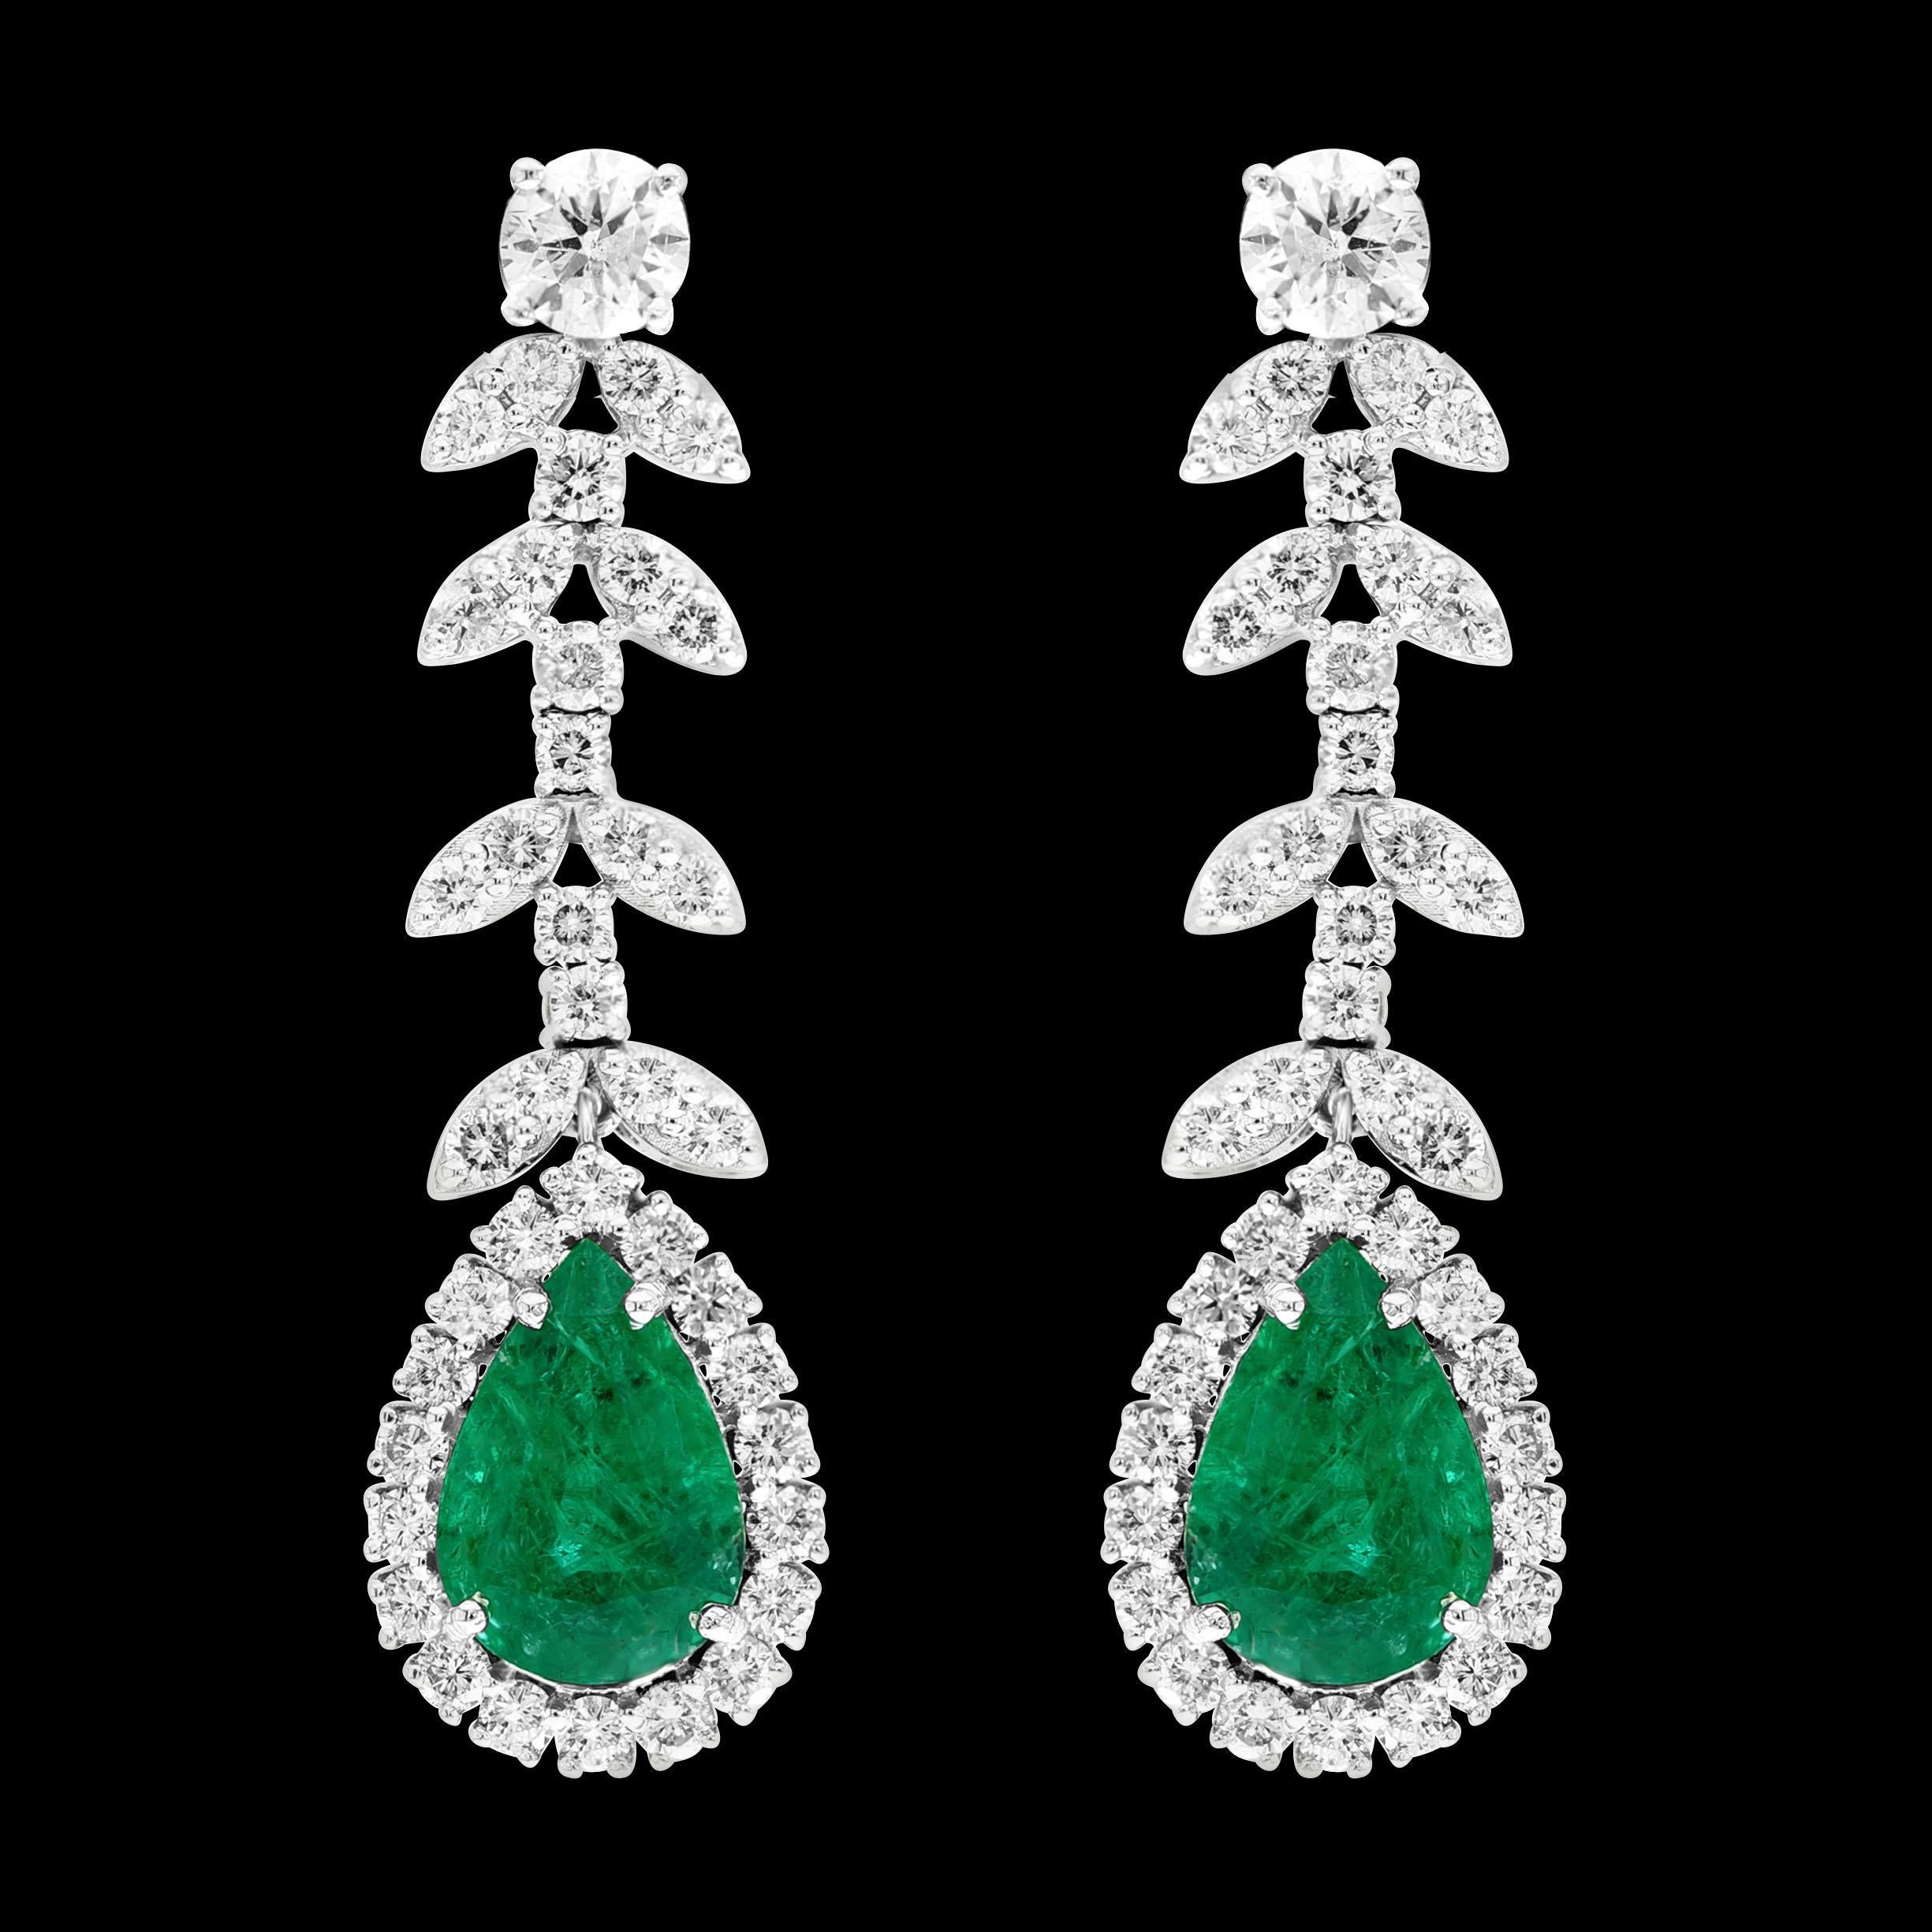 Women's 75 Ct Zambian Emerald and 30 Ct Diamond Necklace and Earring Bridal Suite For Sale